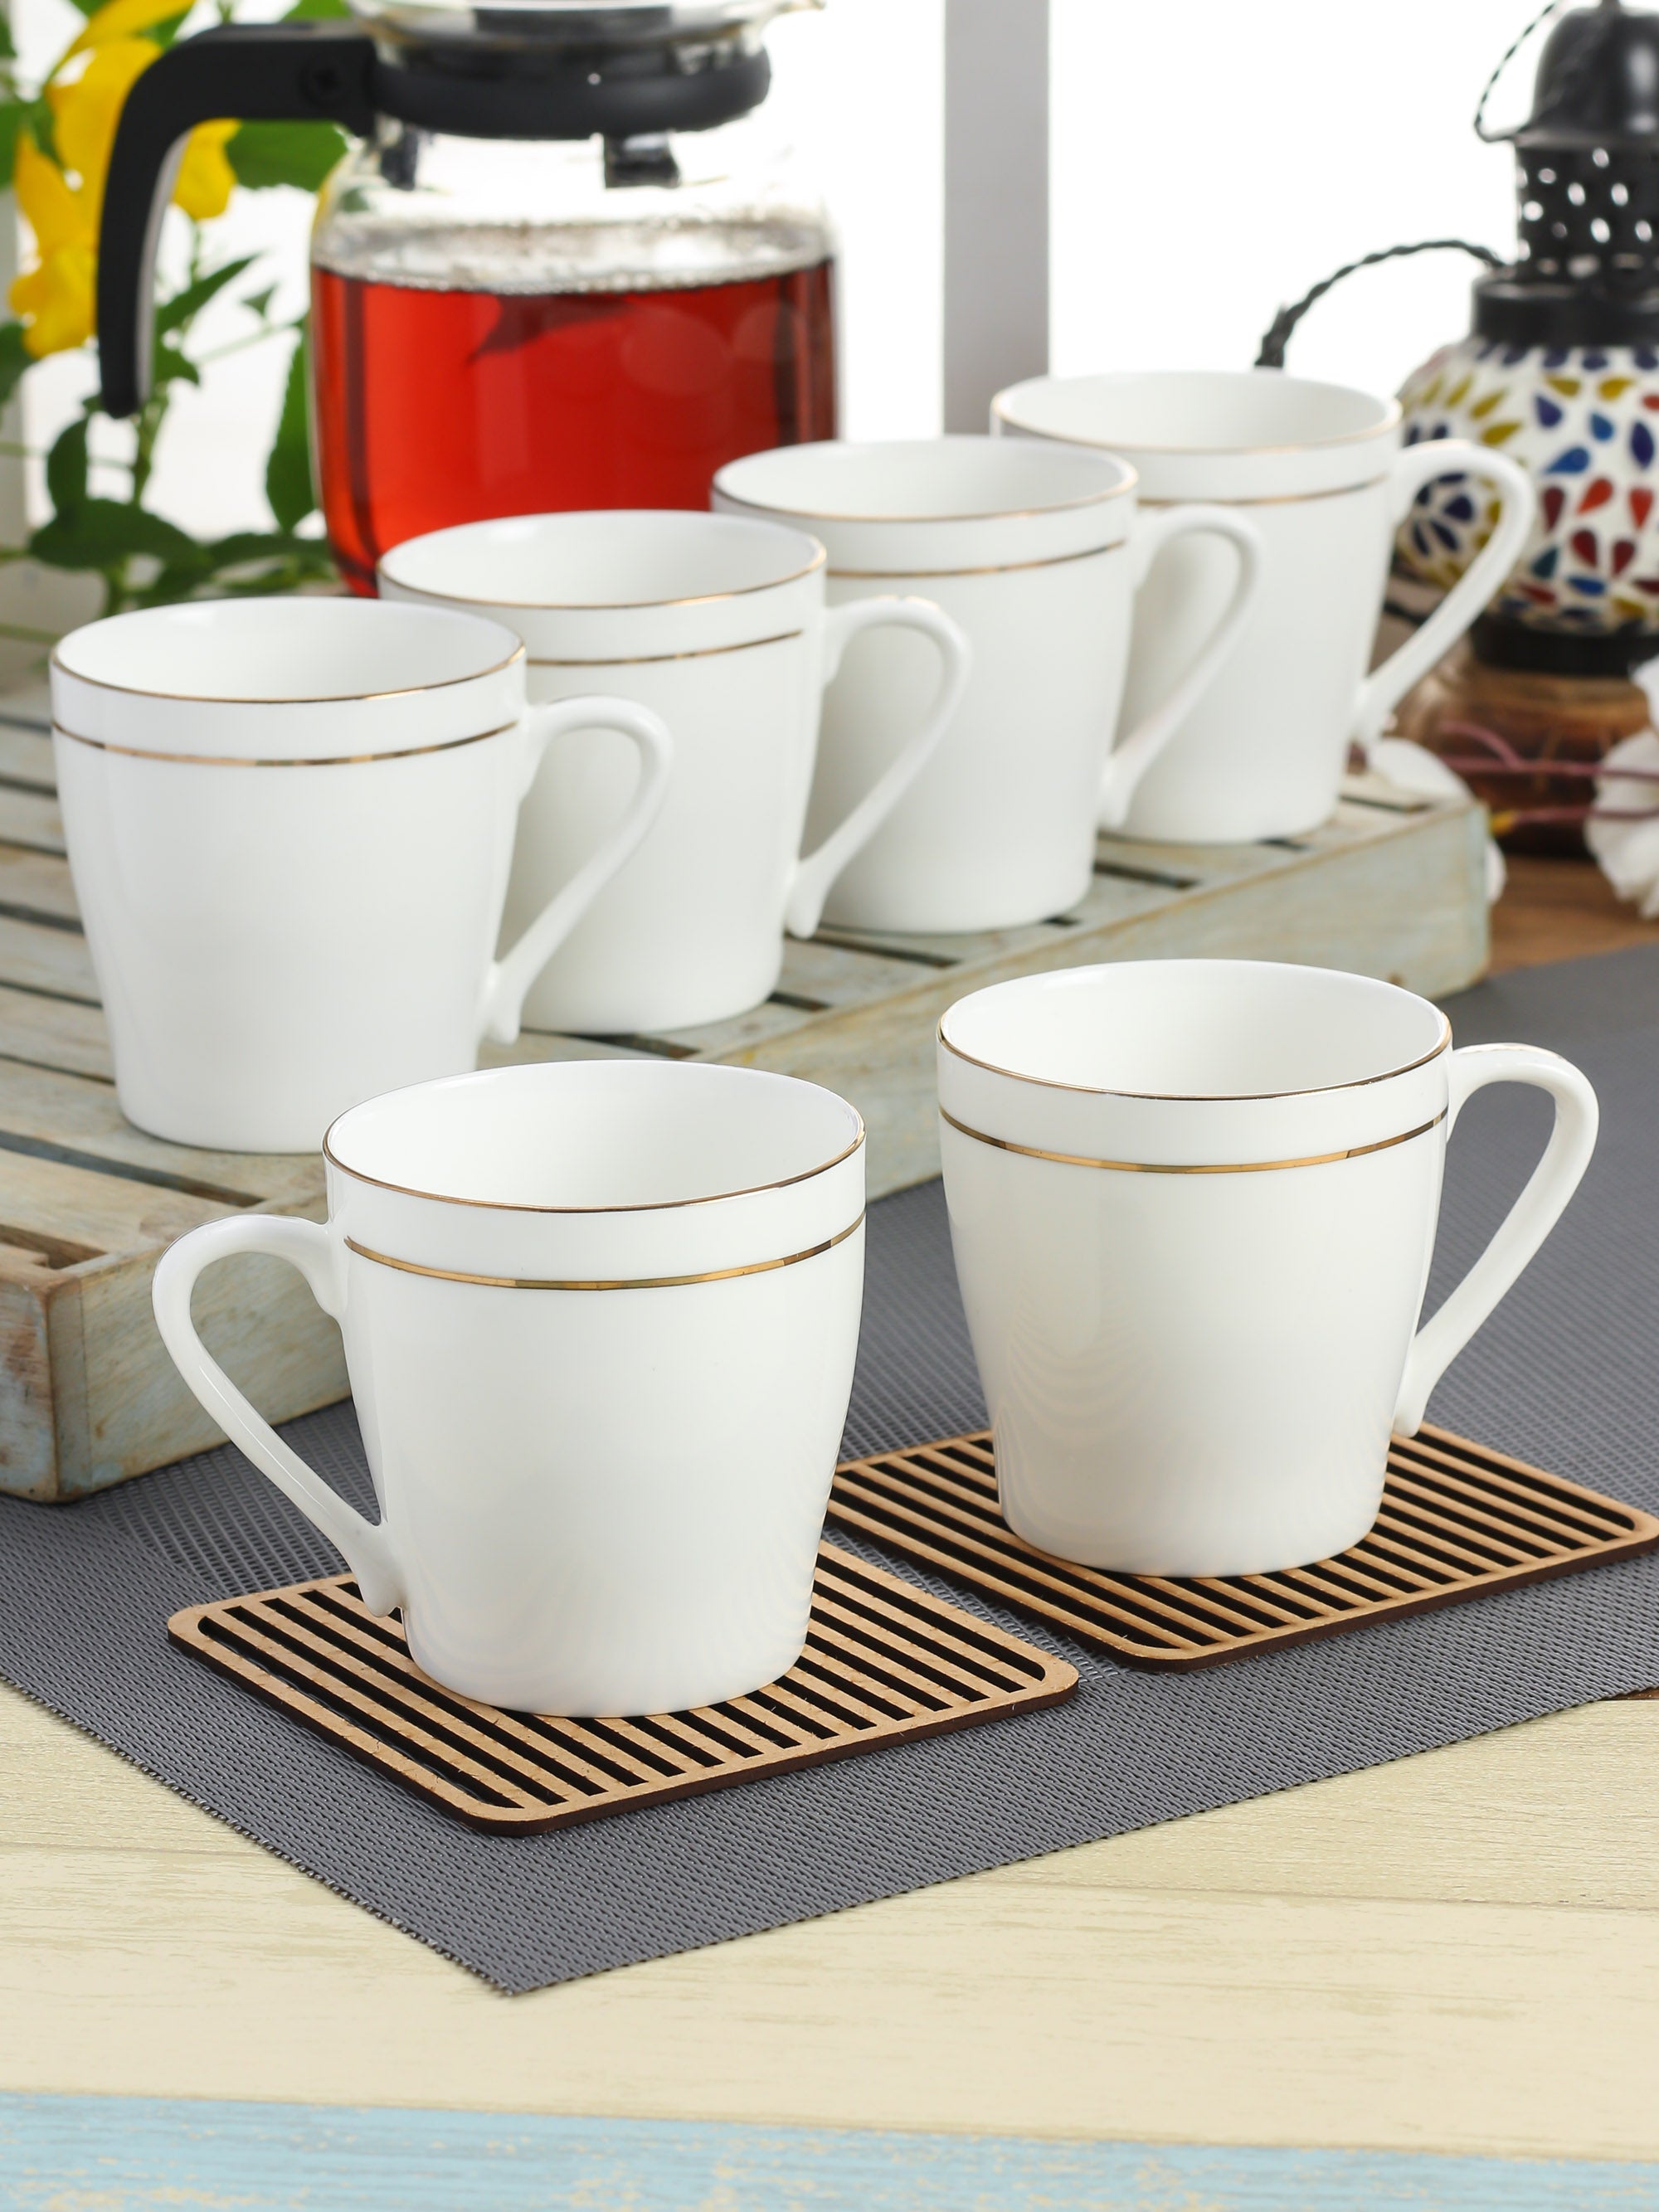 Buy Ceramic Tea Cups | Tea Mugs | Coffee Tea Cup Sets Online @ Best Price –  Page 2 – Clay Craft India